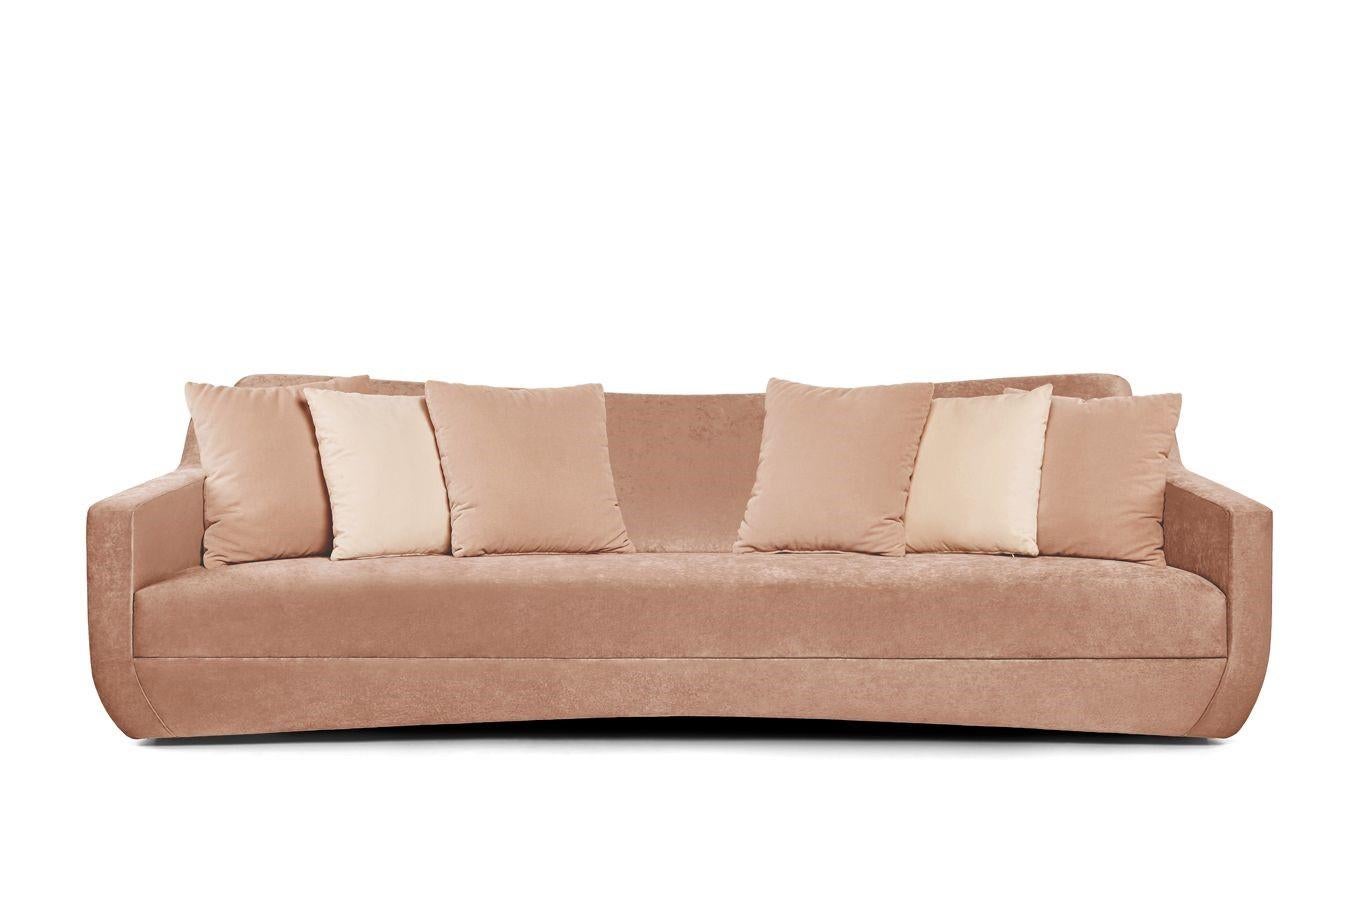 Velvet Contemporary Sculptural Sofa with Discreet Seaming For Sale